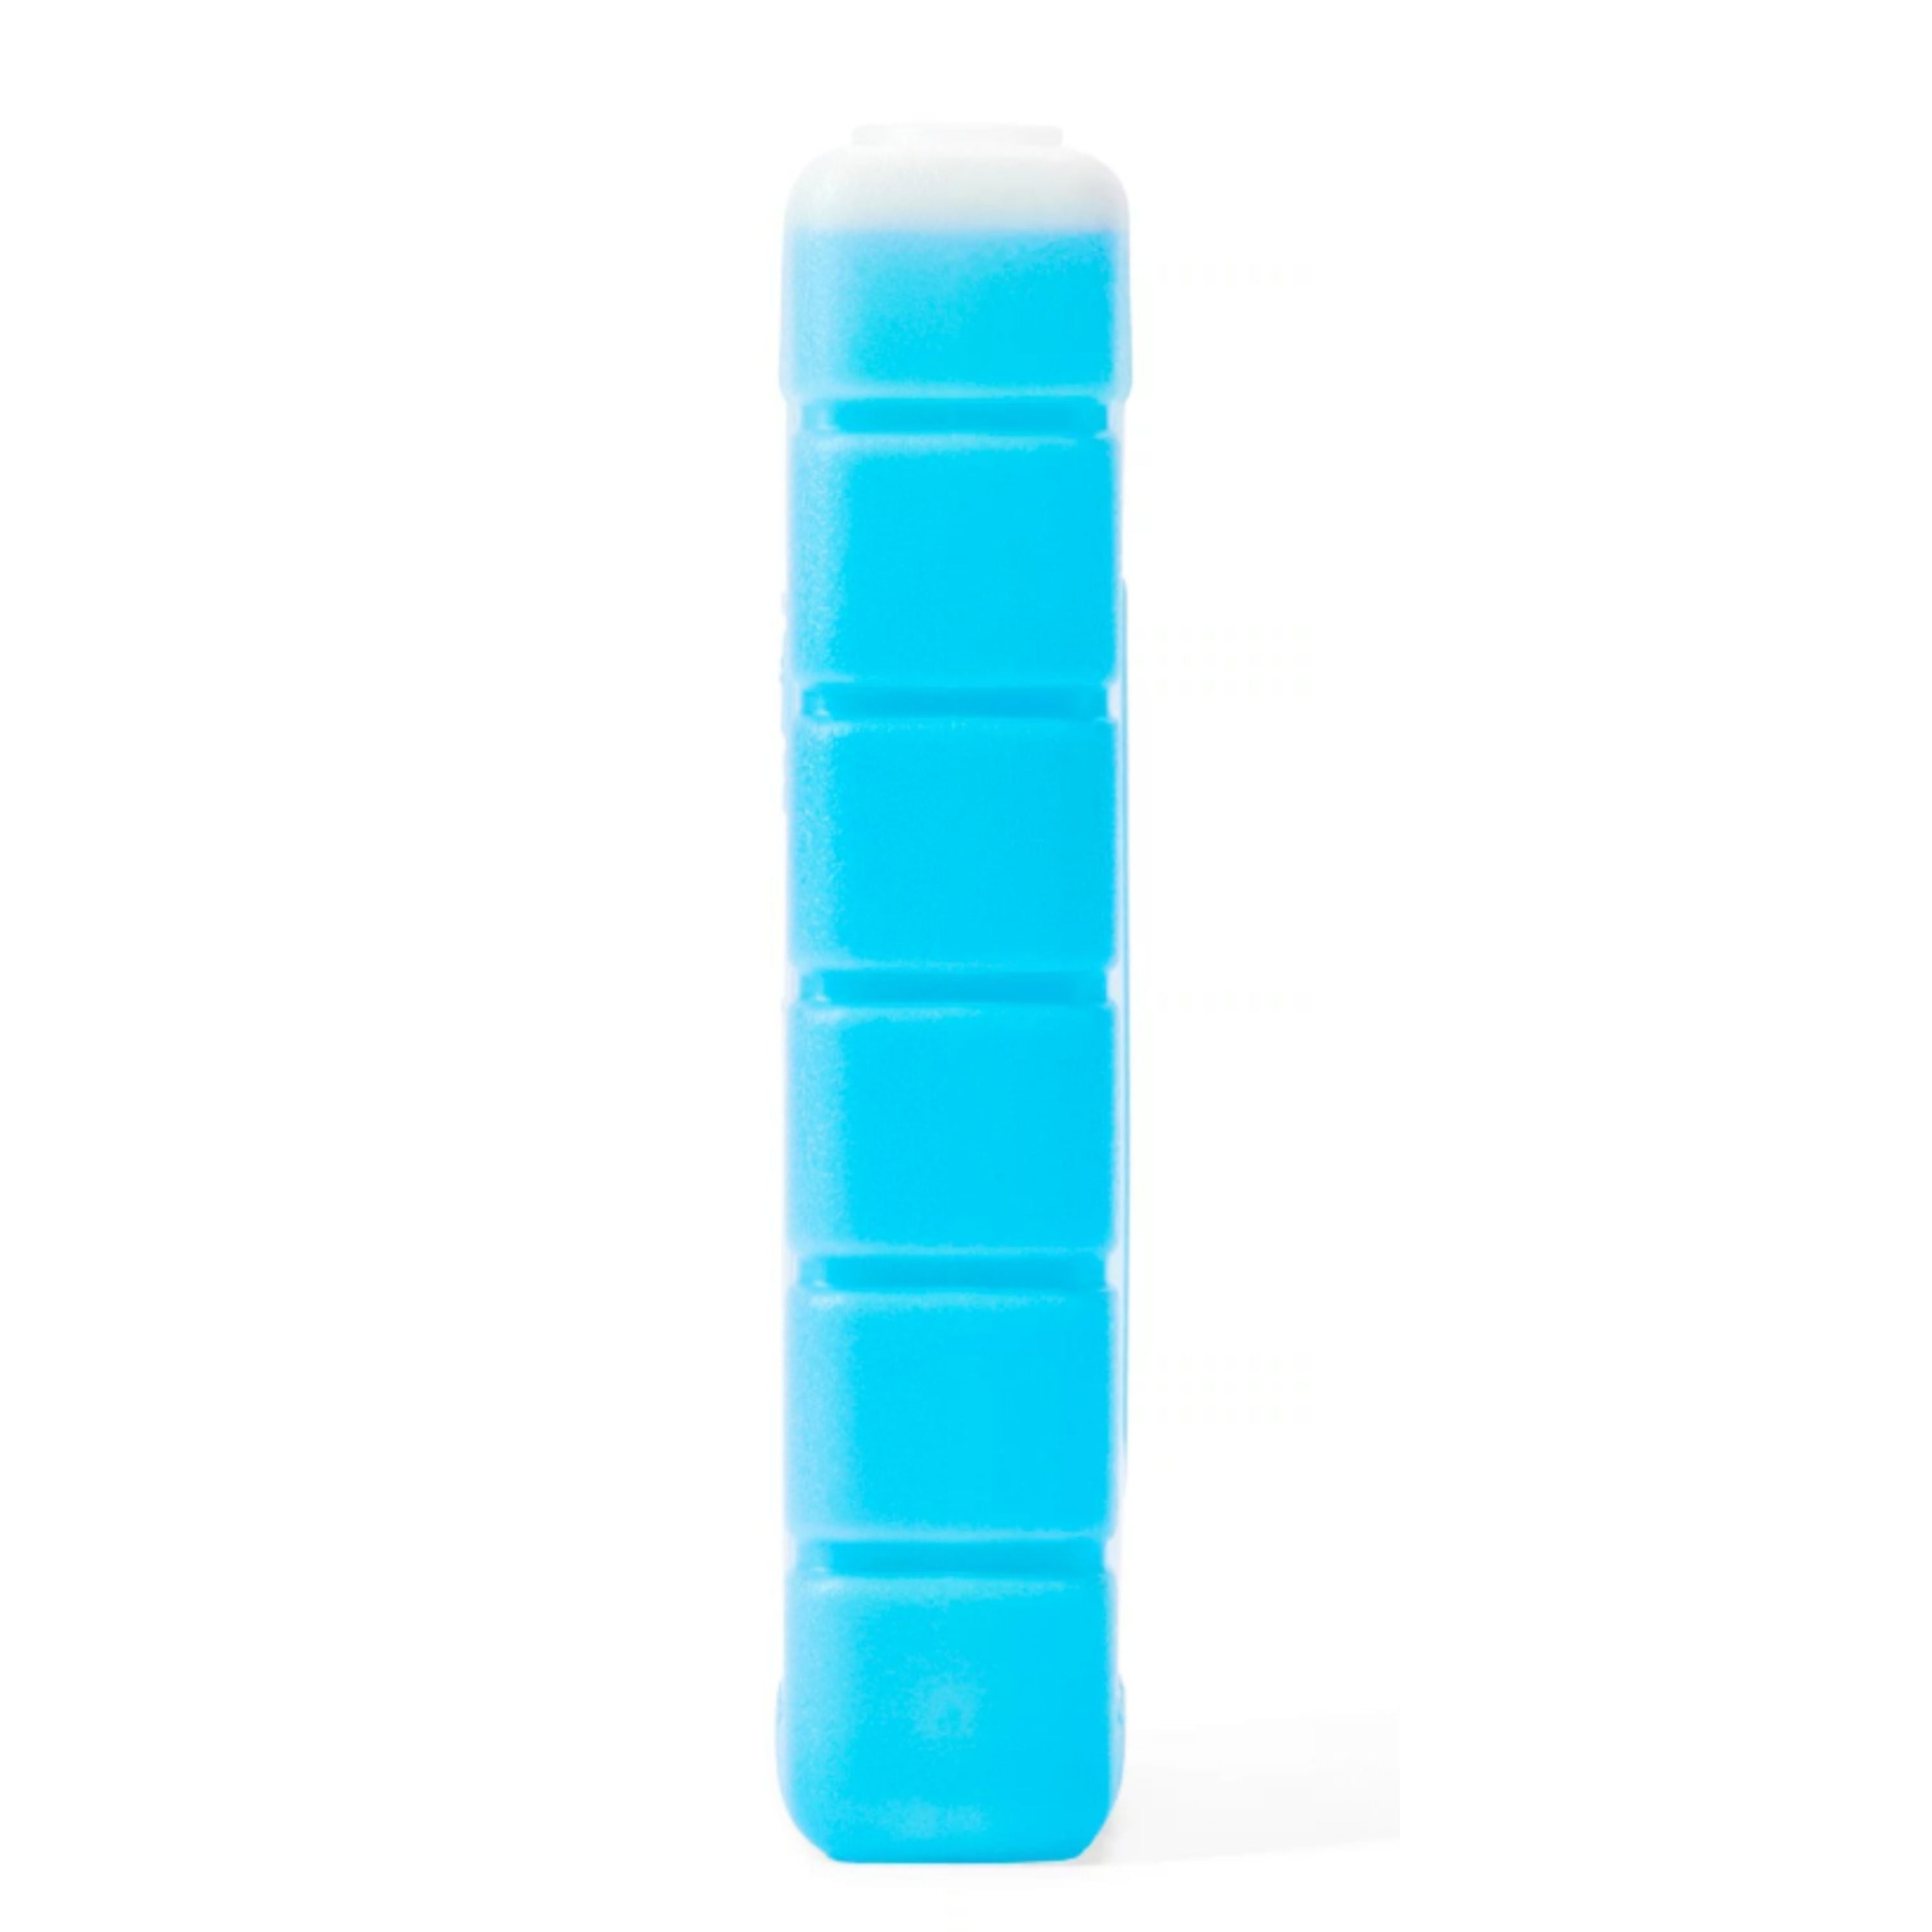 "Chiller" Ice pack - Large